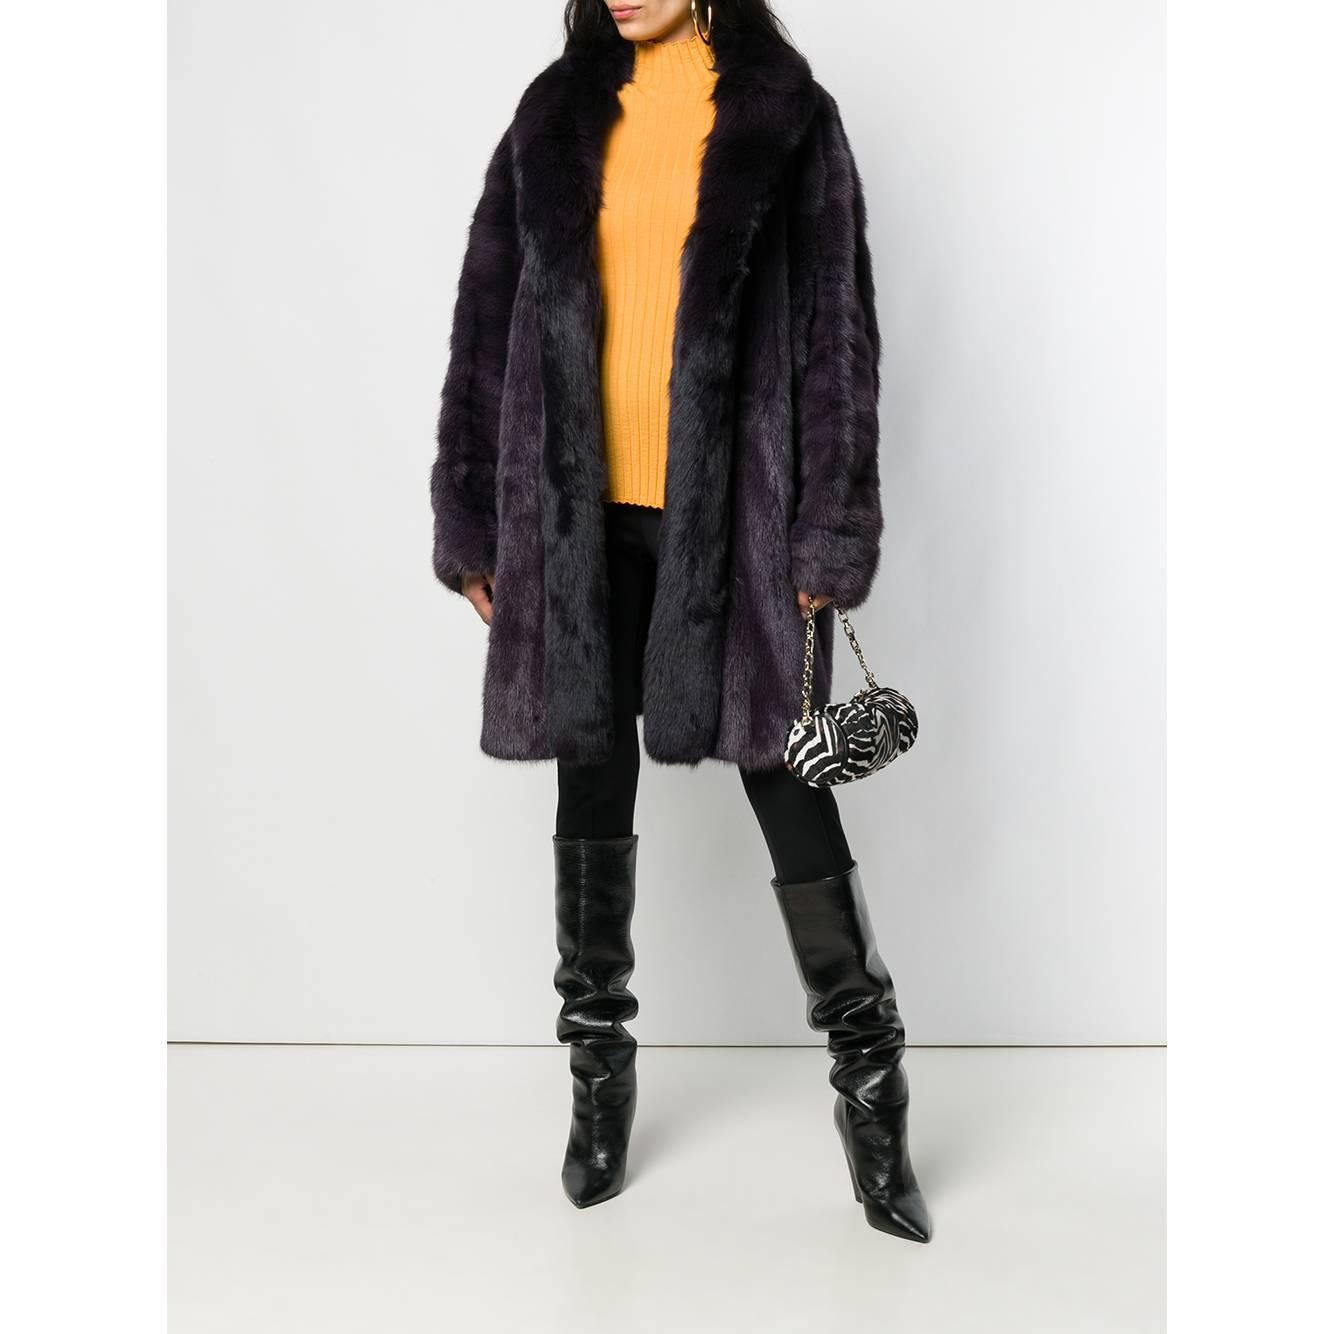 A.N.G.E.L.O. Vintage - ITALY
A.N.G.E.L.O. Vintage Cult purple mink and fox fur coat. V-shaped shawl collar, front closure with hooks. Long sleeves and front welt pockets.

Please note, this item cannot be shipped outside the European Union.

Years: